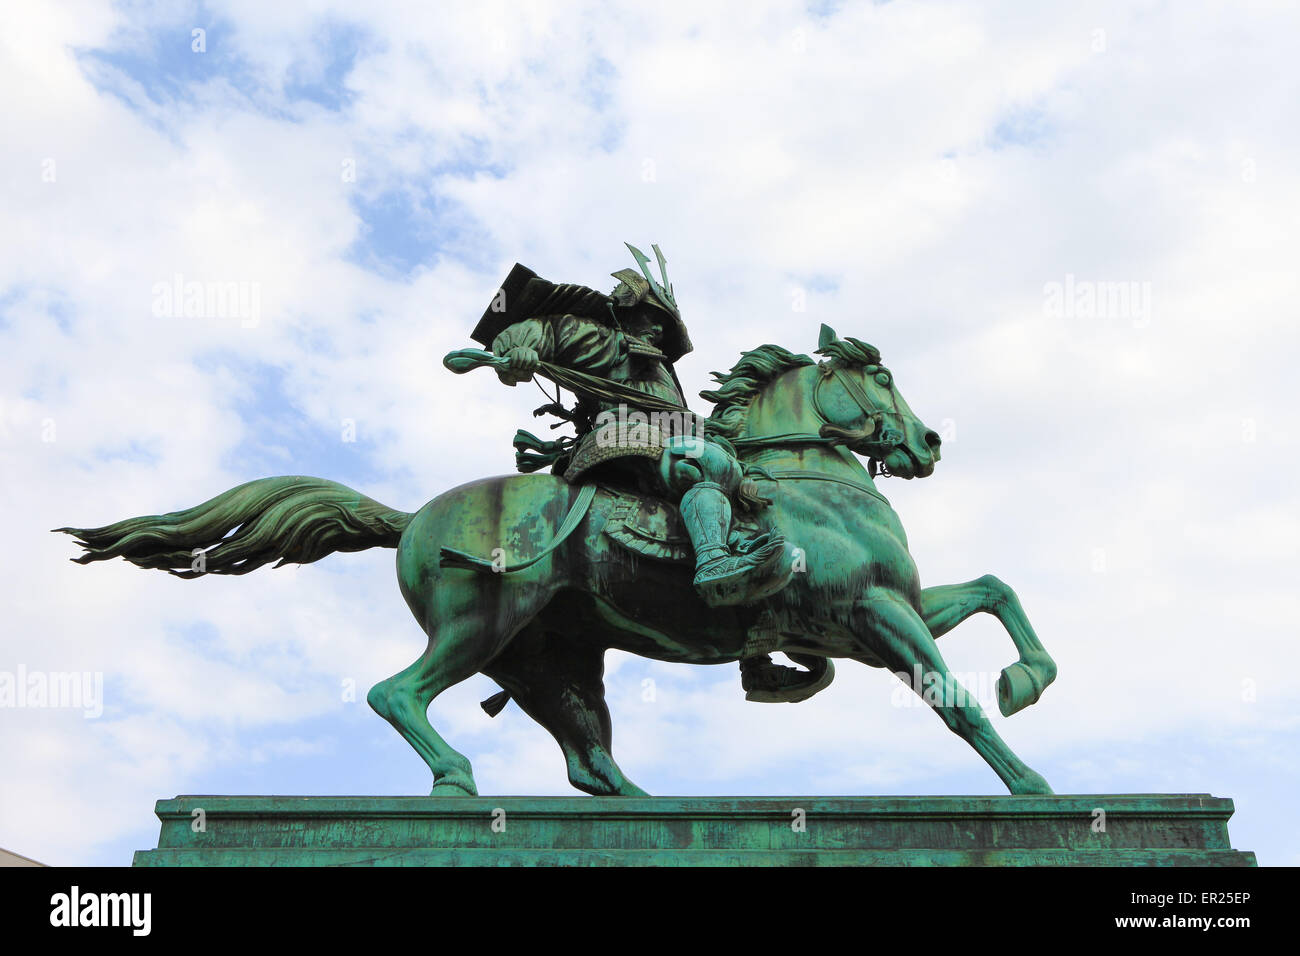 Statue of the great samurai Kusunoki Masashige at the East Gardens located at Tokyo Imperial Palace, Japan. Stock Photo